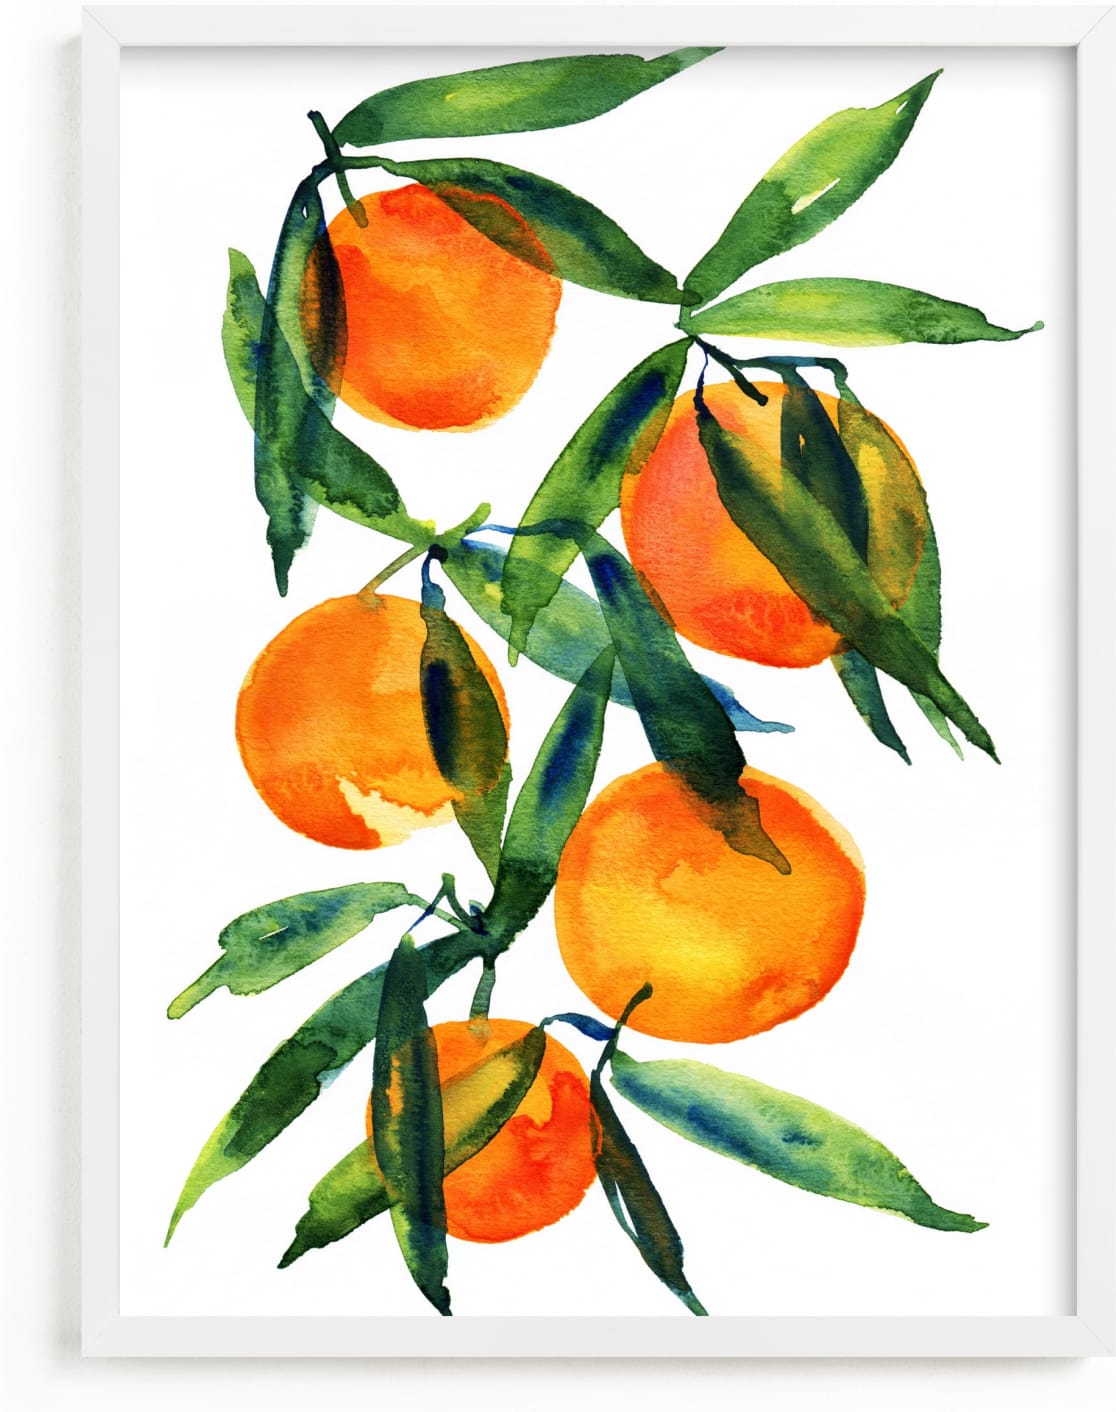 This is a colorful art by Alexandra Dzh called Tangerine.